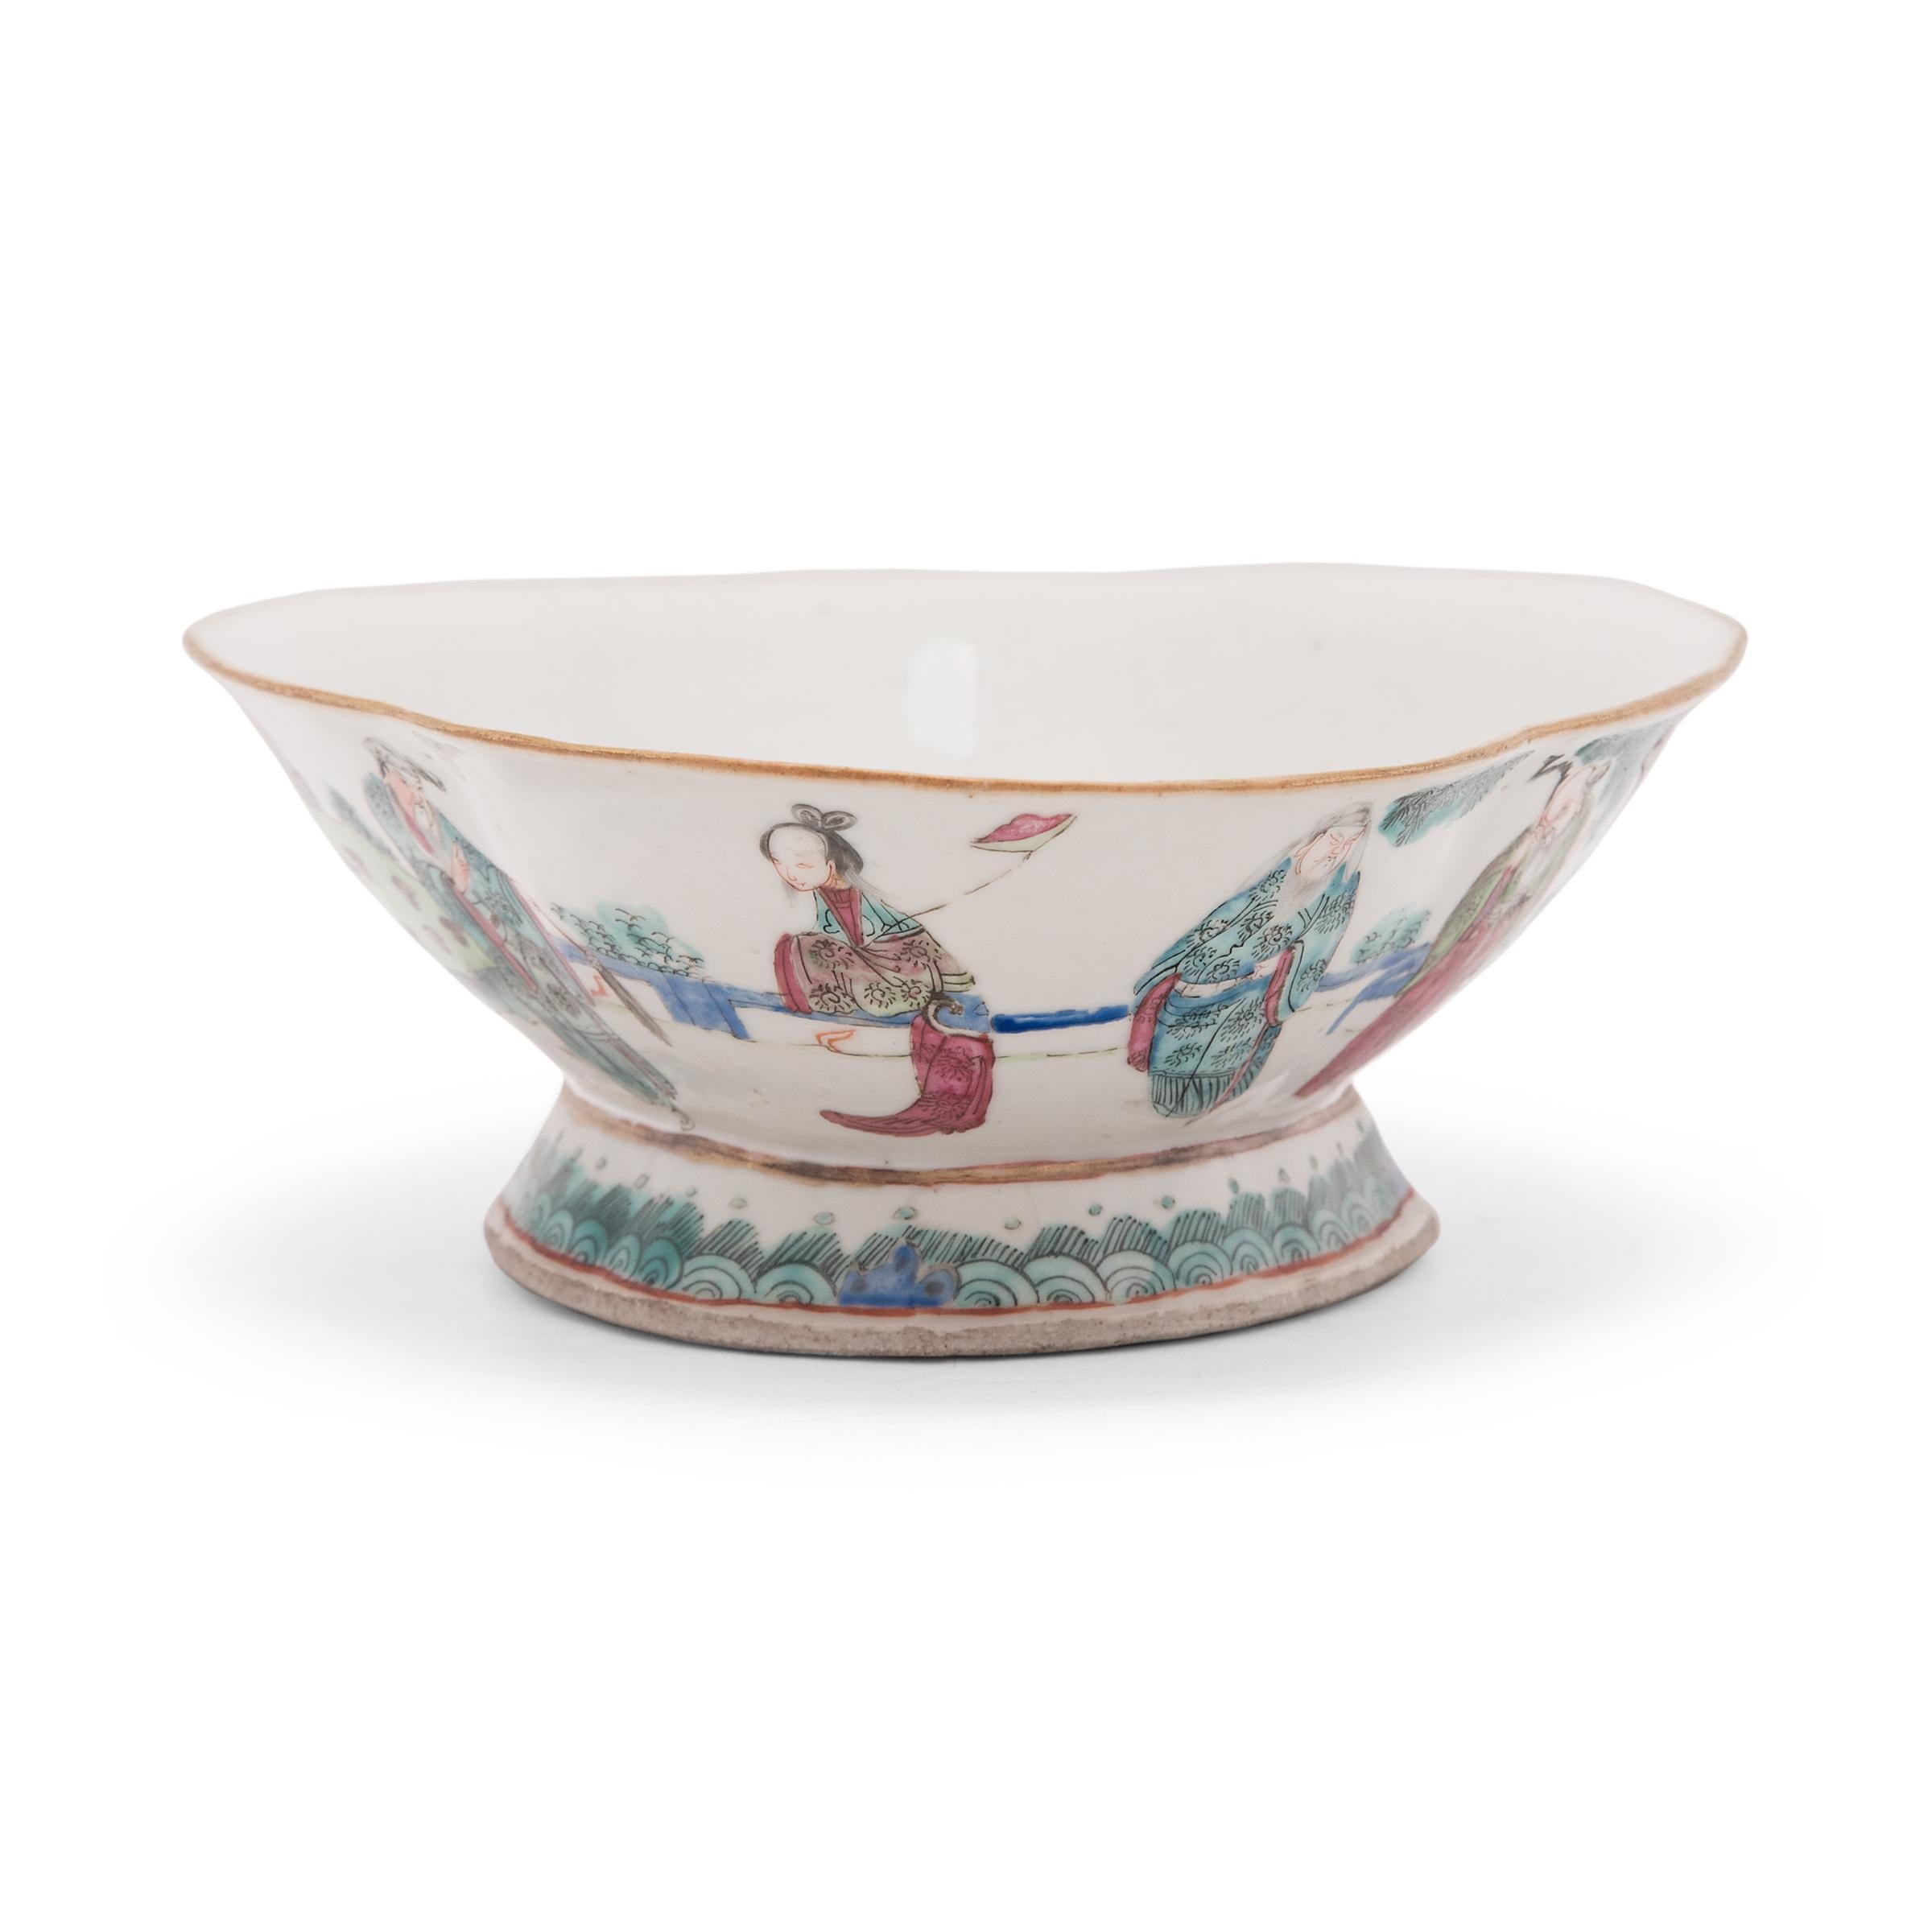 Enameled Chinese Footed Offering Bowl with Gathering of Immortals, c. 1850